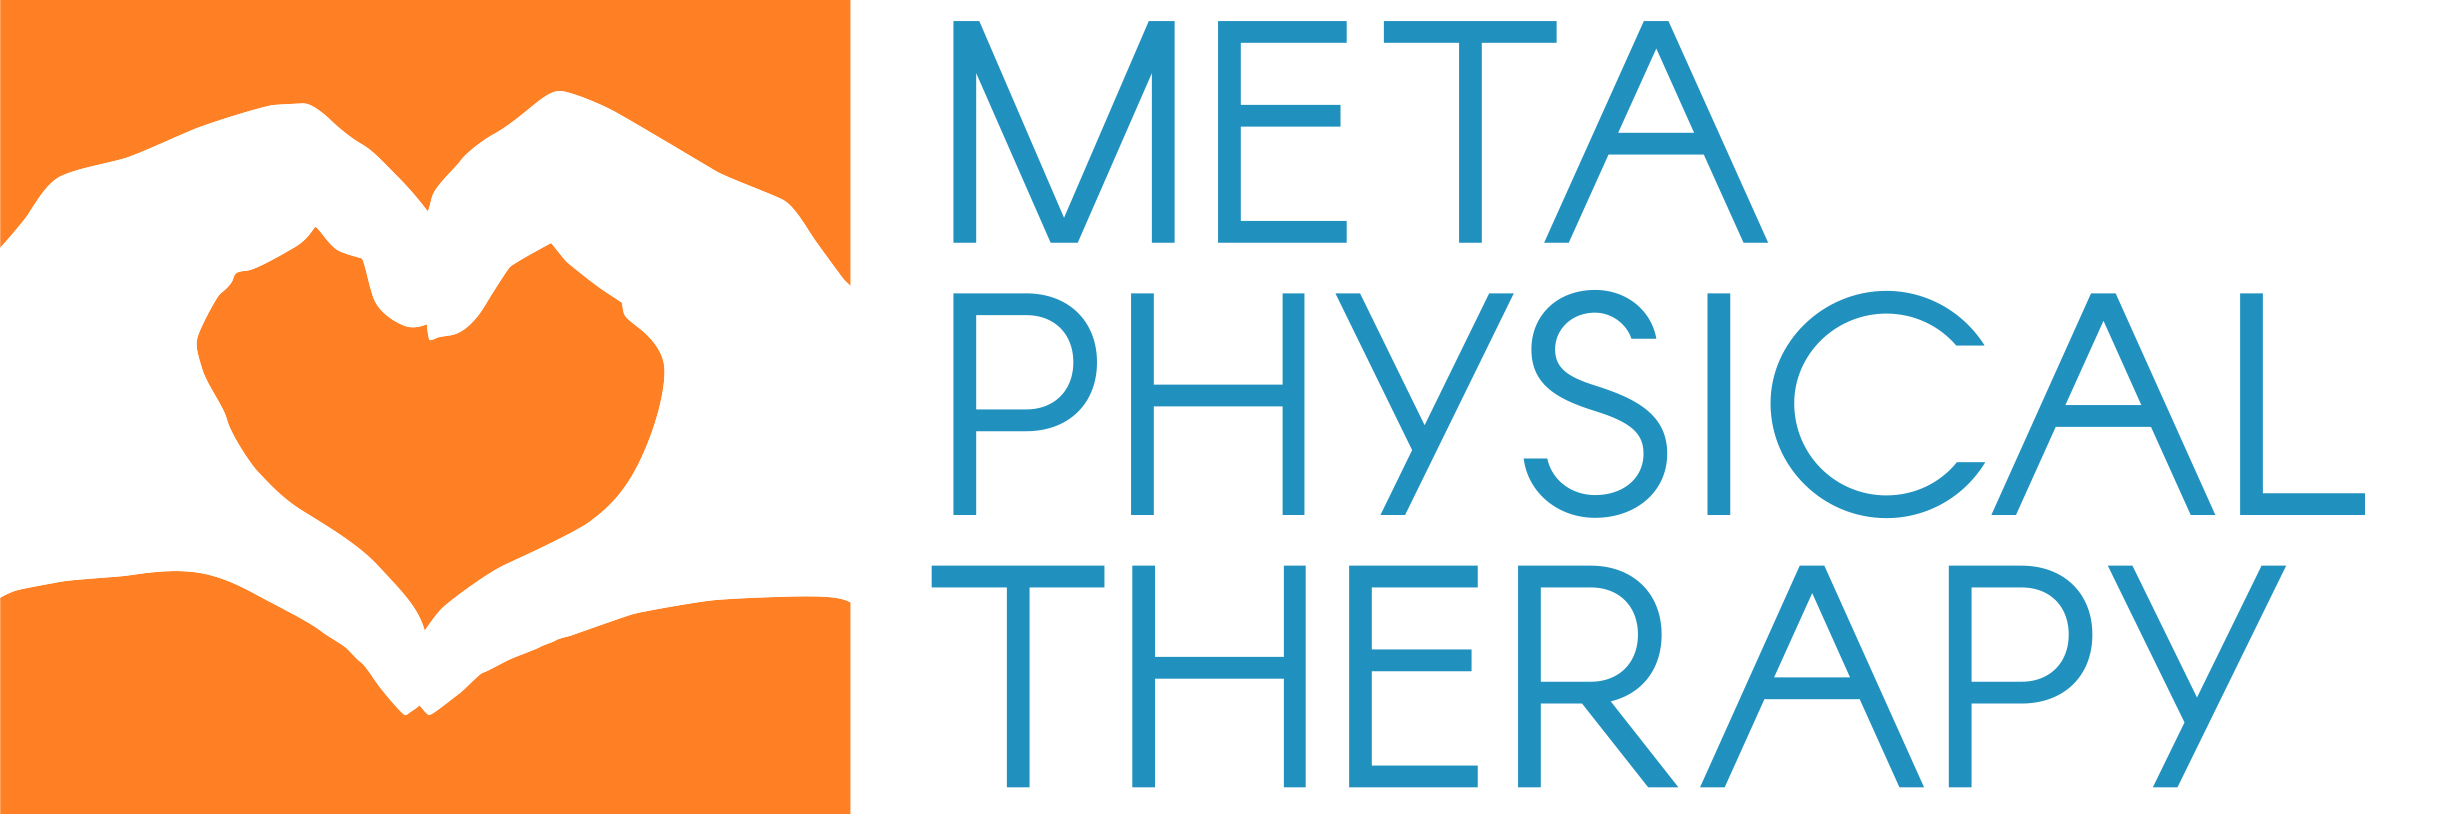 META PHYSICAL THERAPY